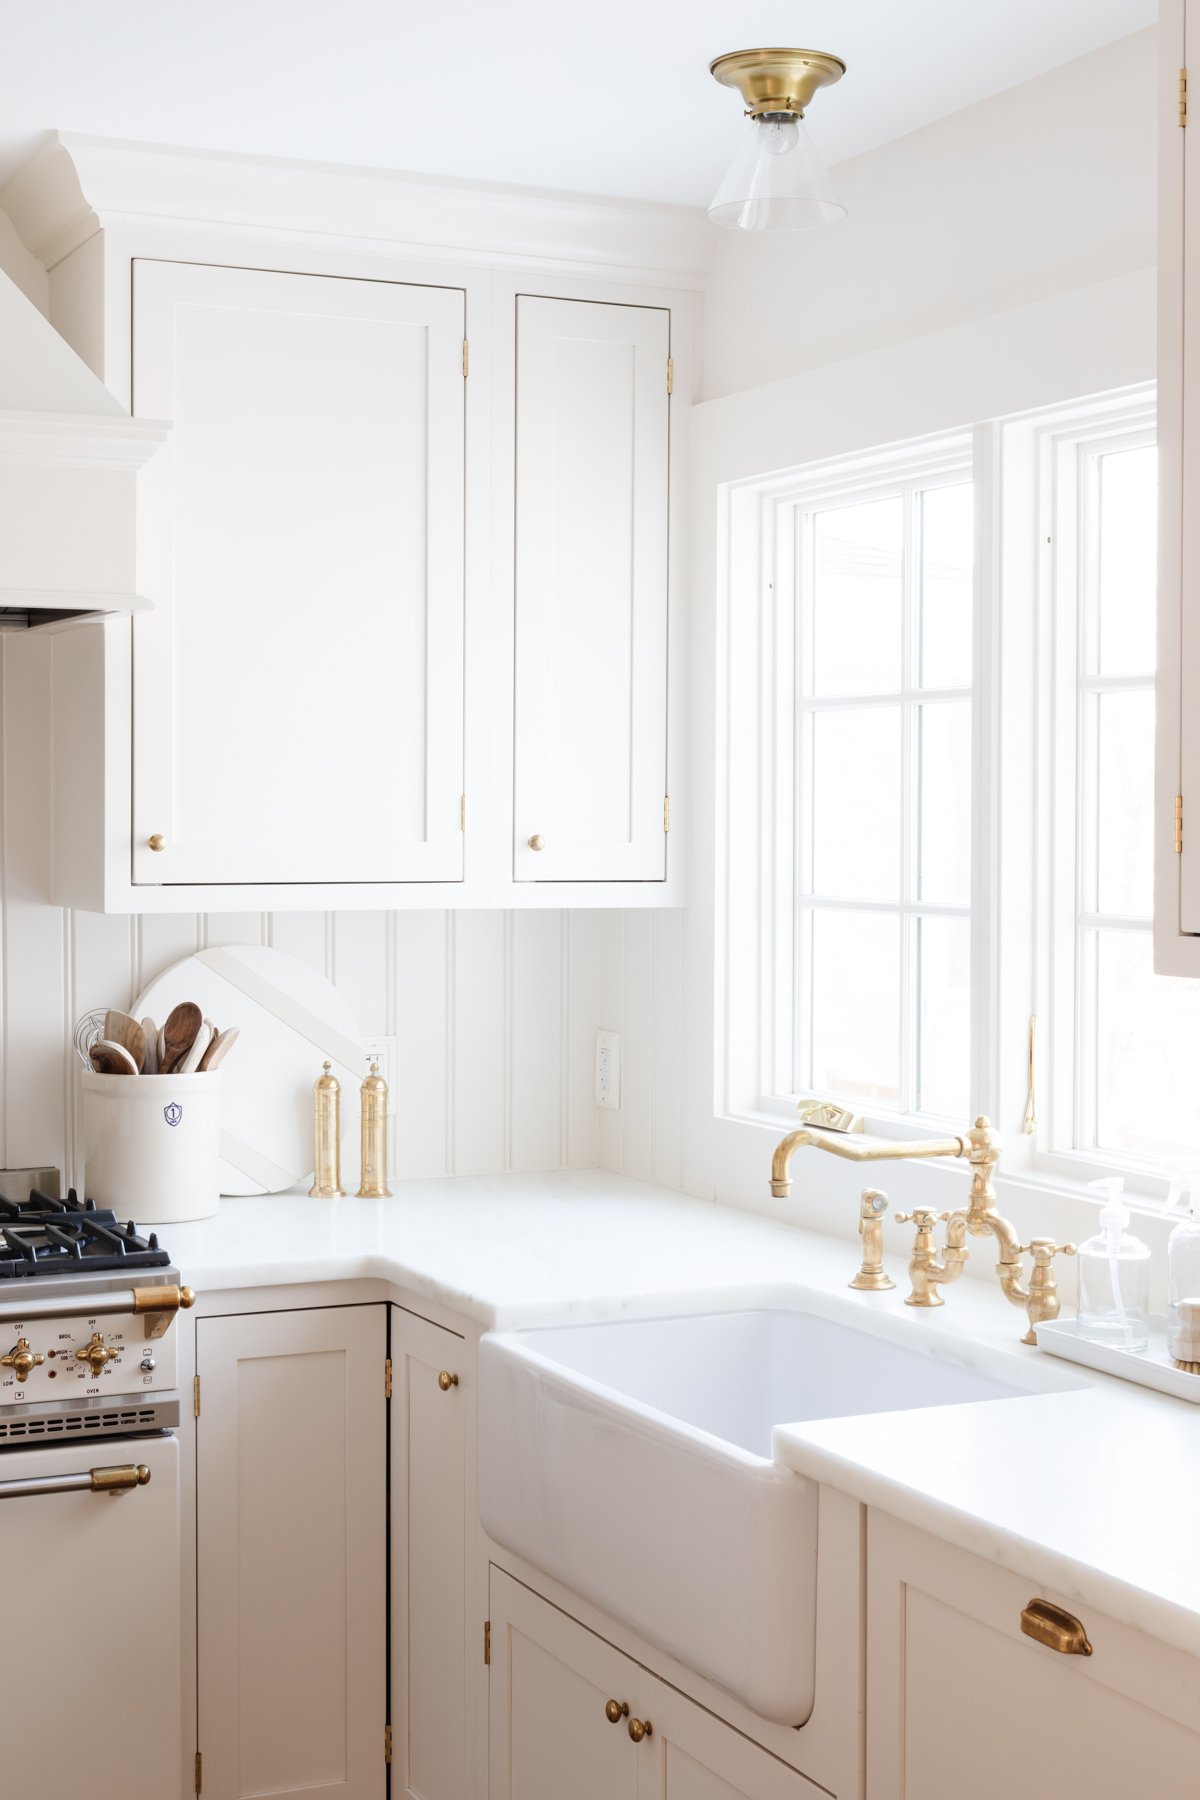 A white kitchen with a farmhouse sink and an unlacquered brass faucet.